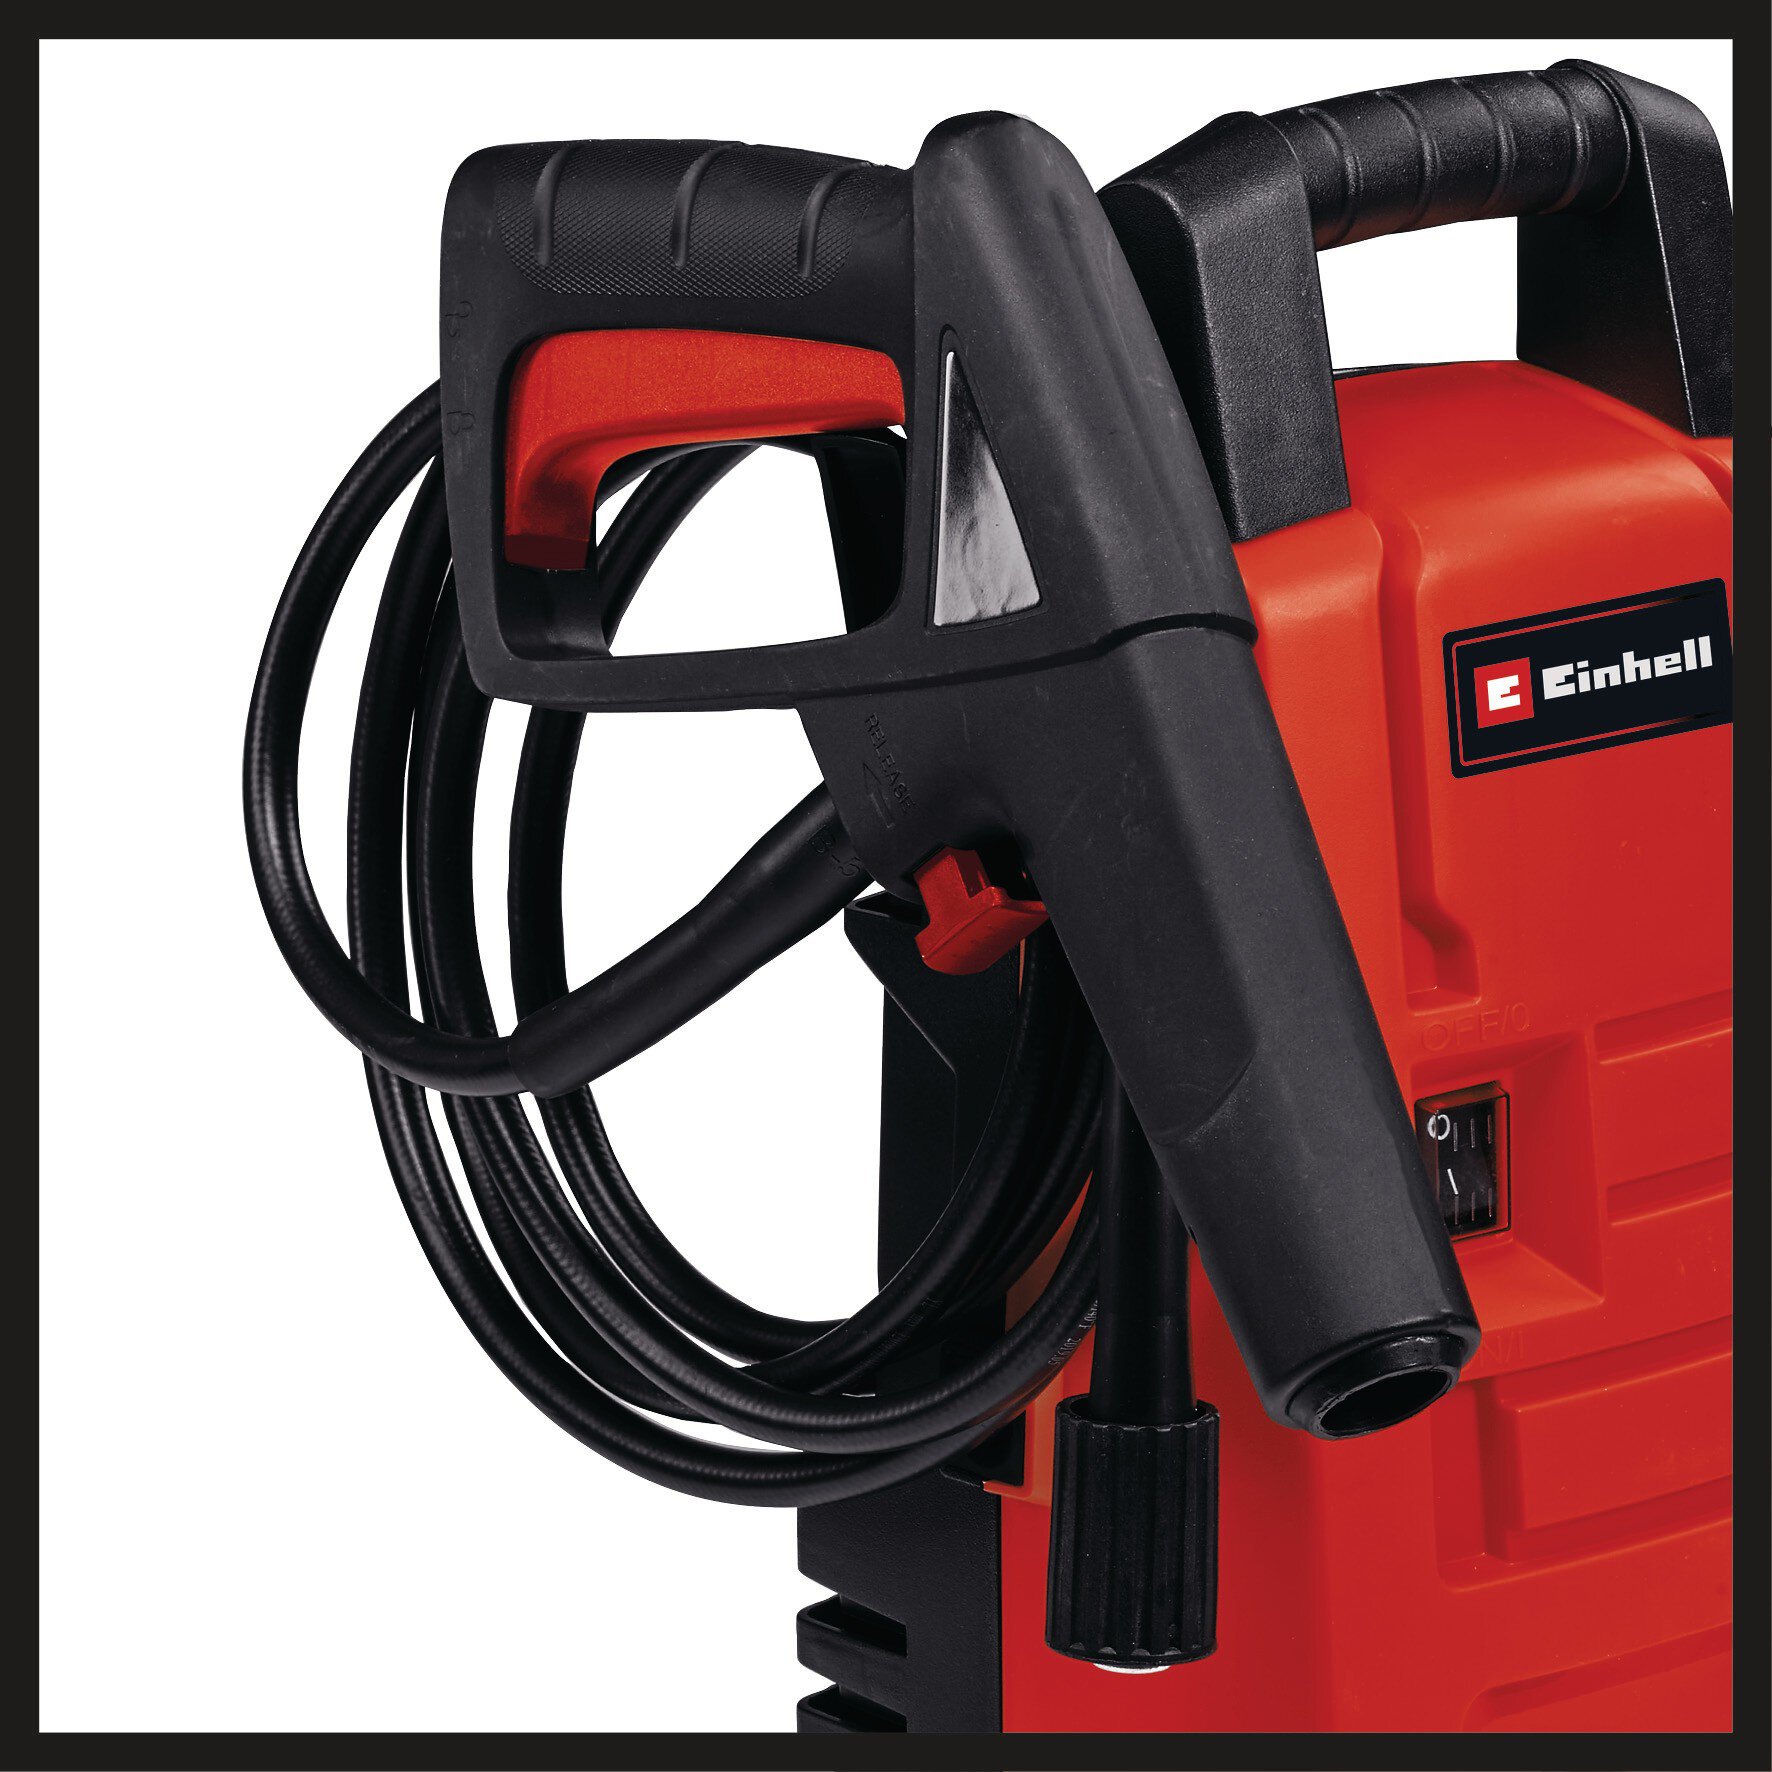 einhell-classic-high-pressure-cleaner-4140740-detail_image-003